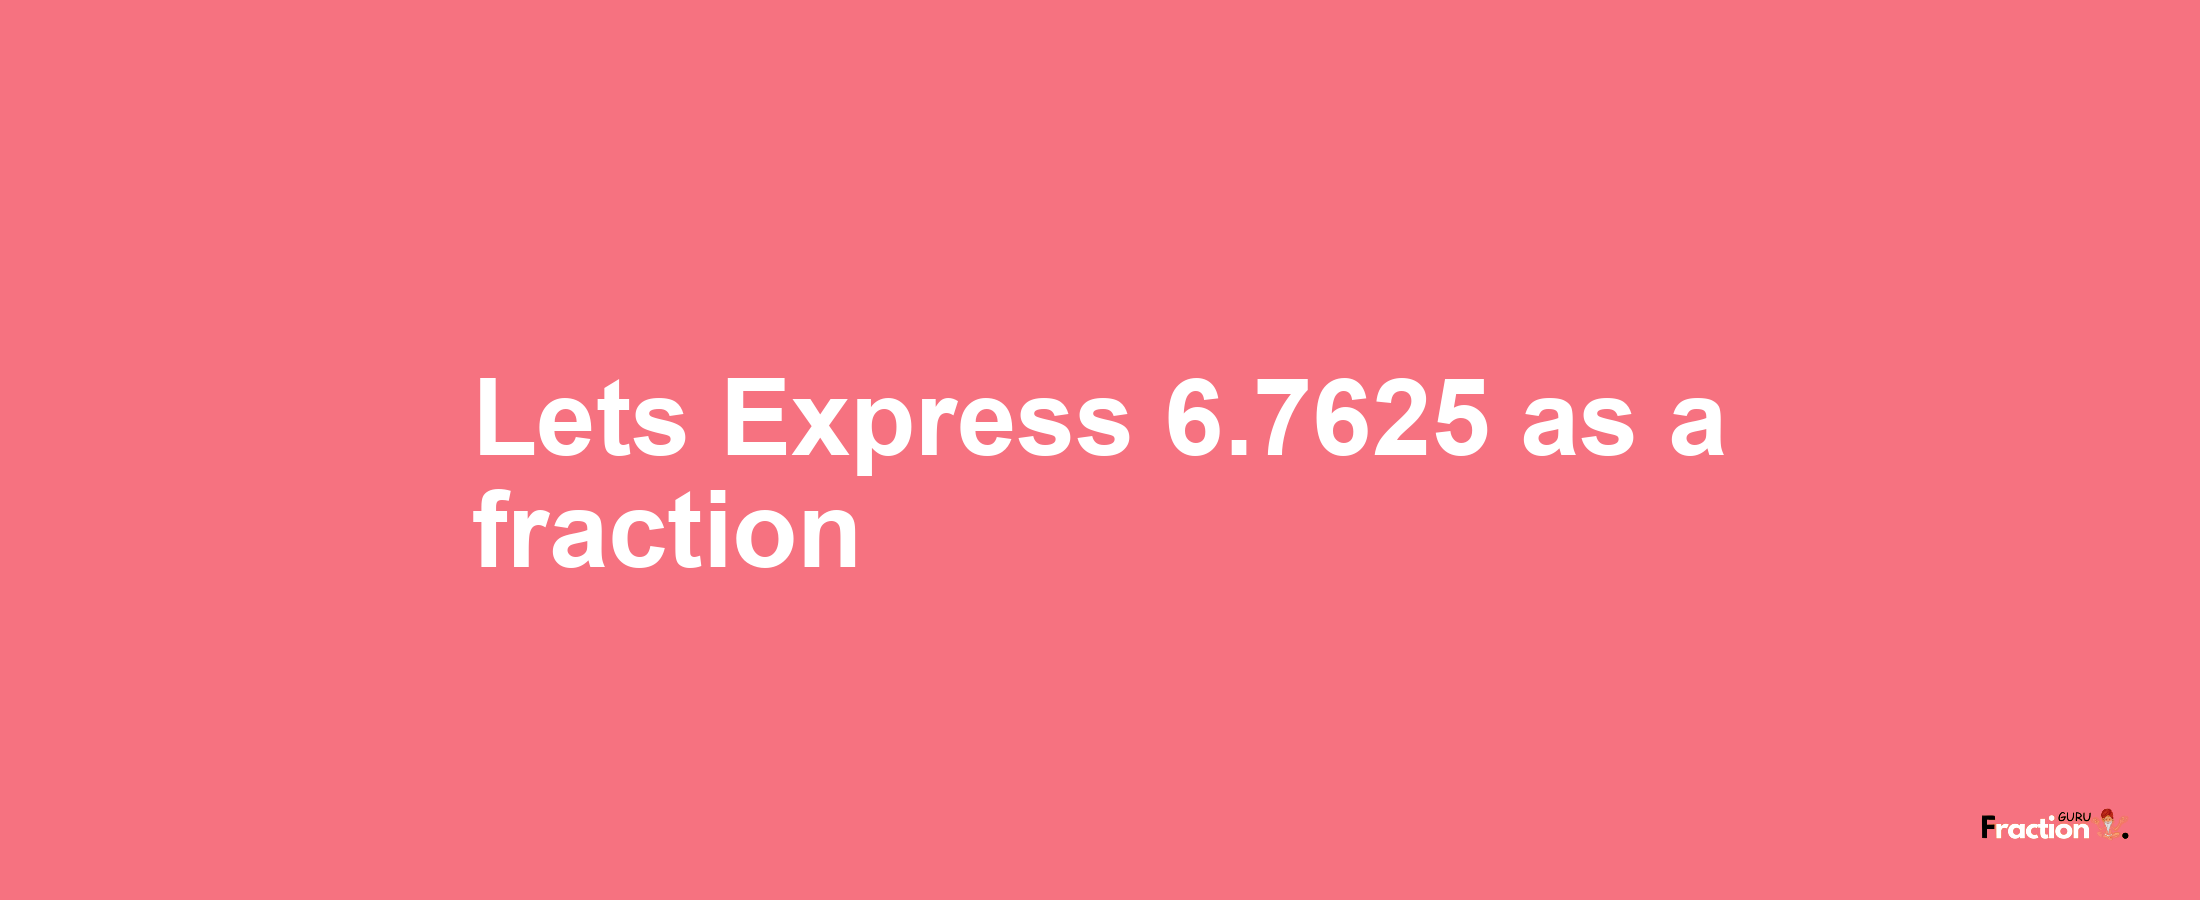 Lets Express 6.7625 as afraction